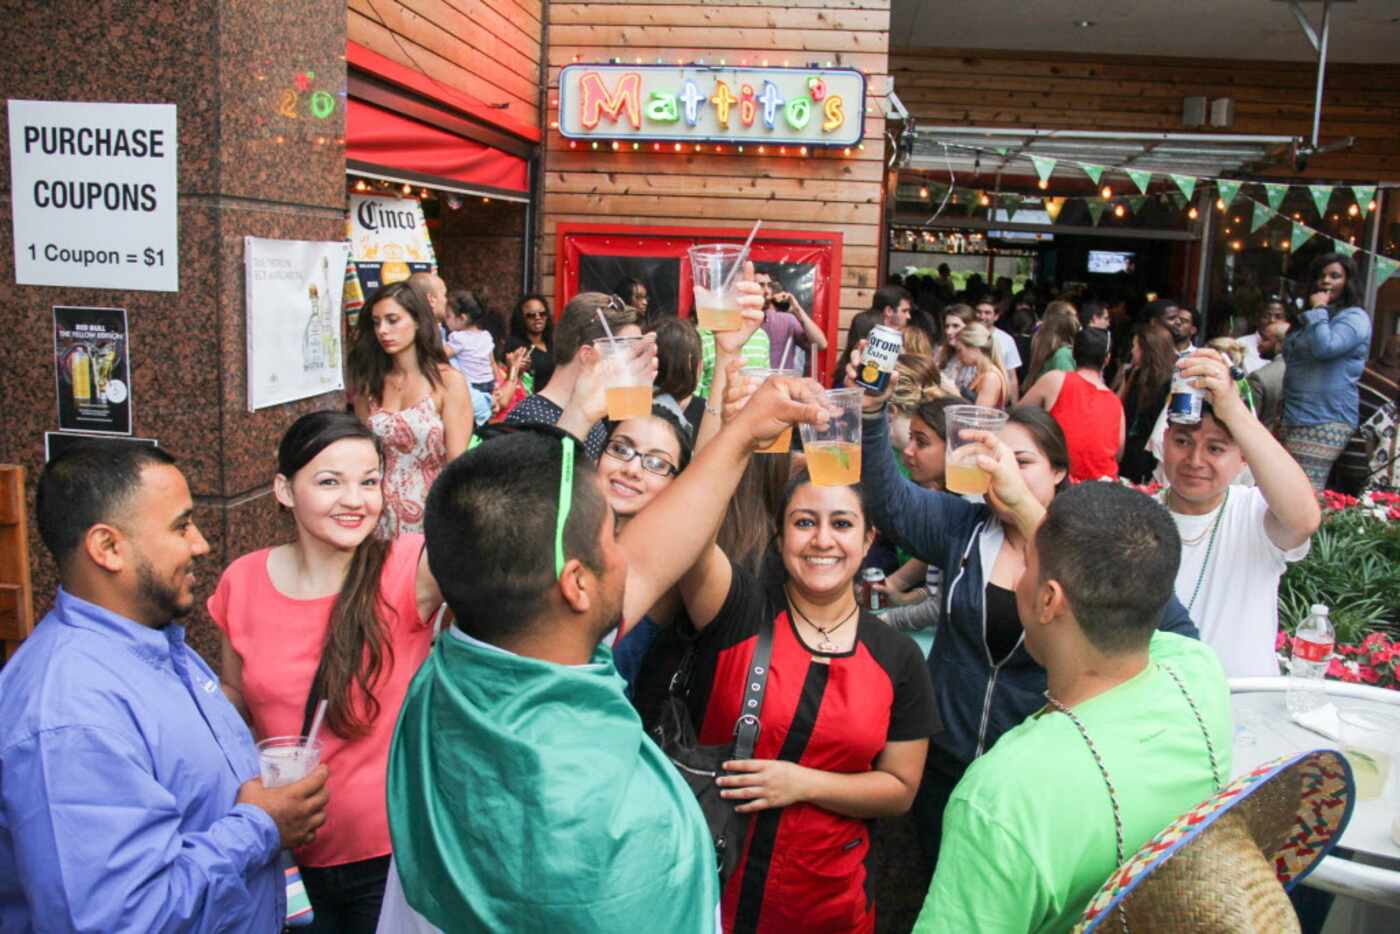 Cinco De Mayo celebrations at Mattitos in Uptown on May 5, 2015.